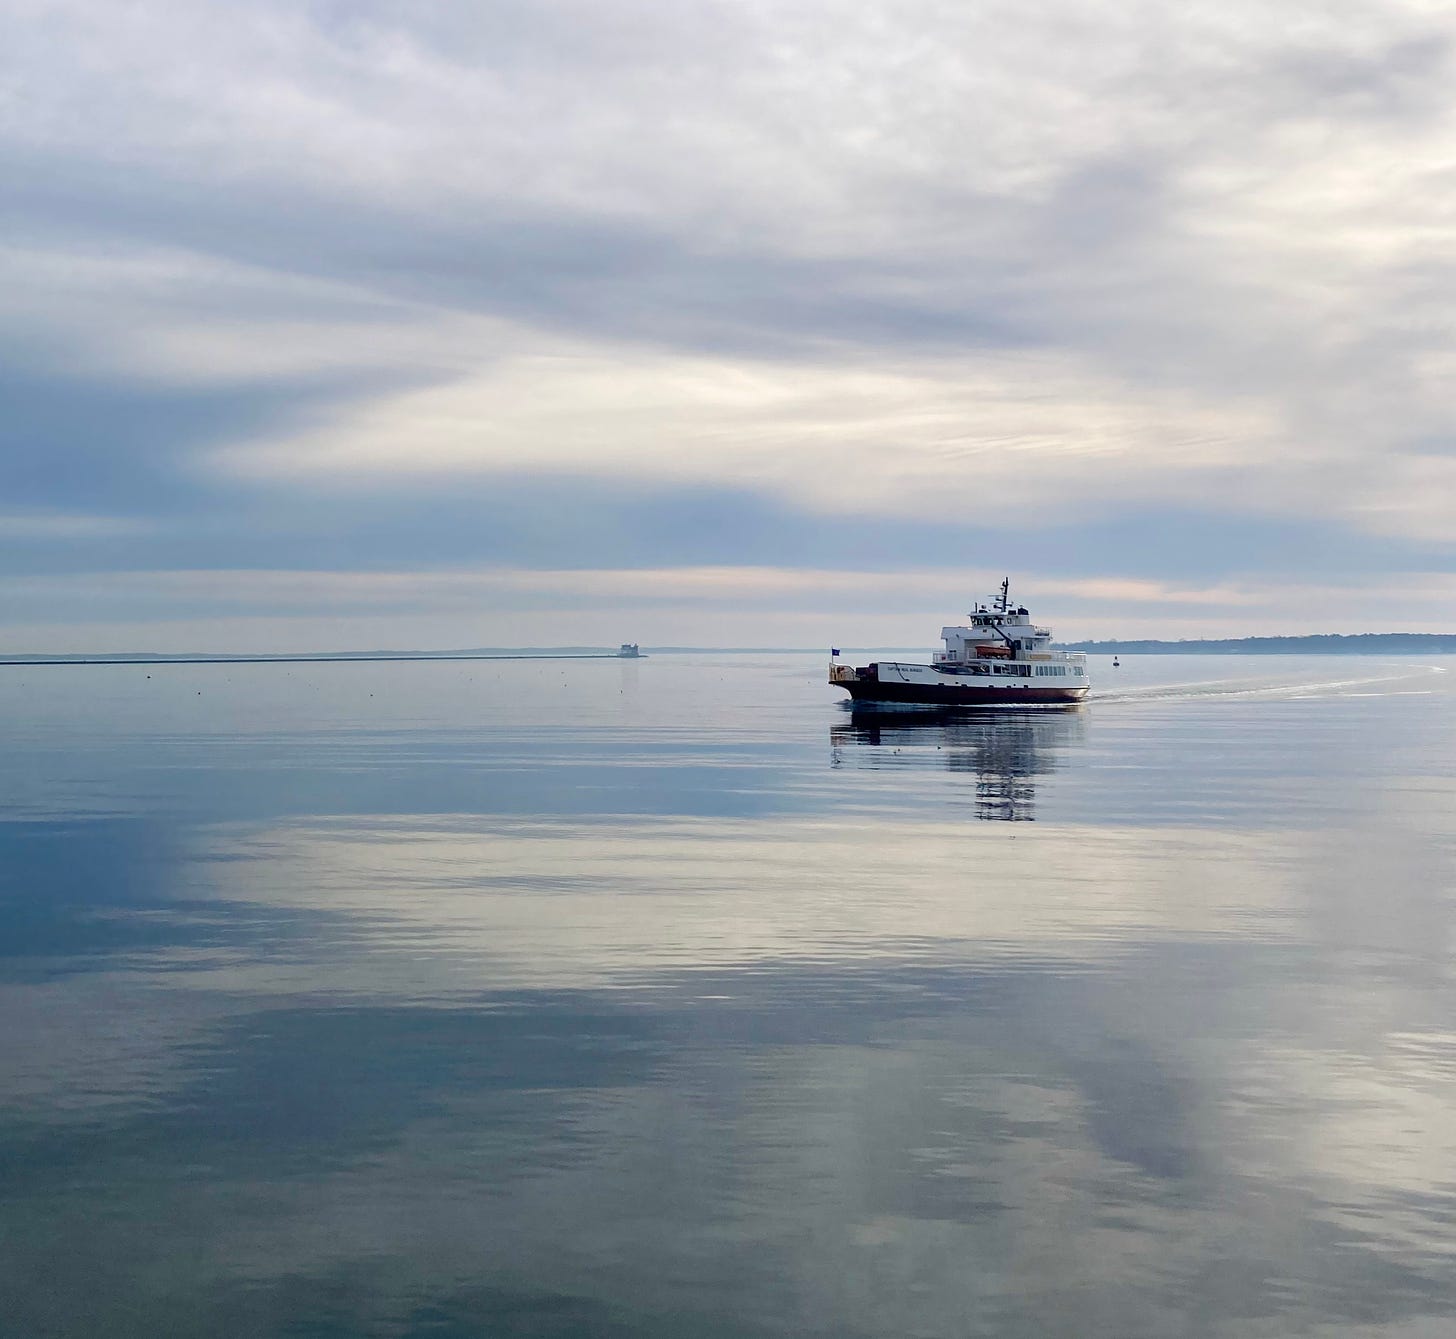 A ferry glides through calm water in a harbor. The sky is overcast and reflected in the water. A breakwater and lighthouse is visible in the background.